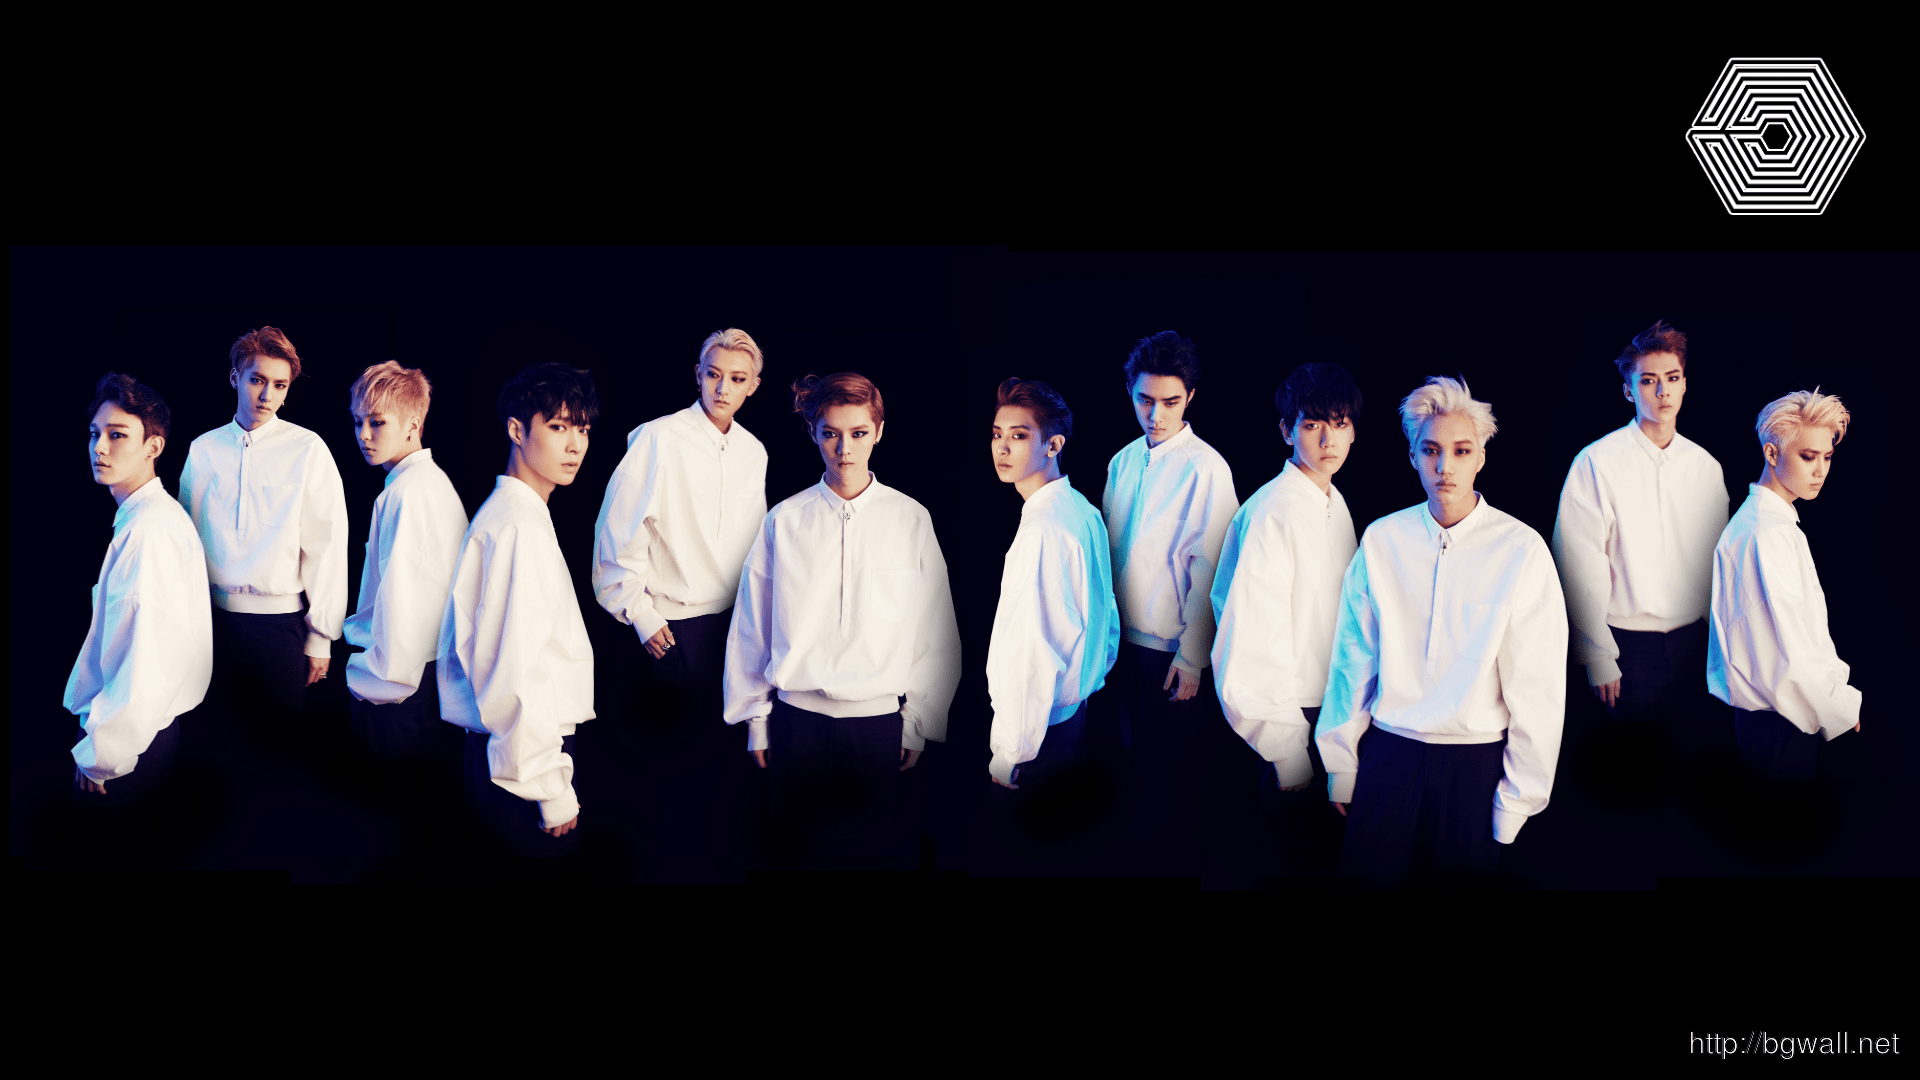 Download Exo wallpapers for mobile phone free Exo HD pictures